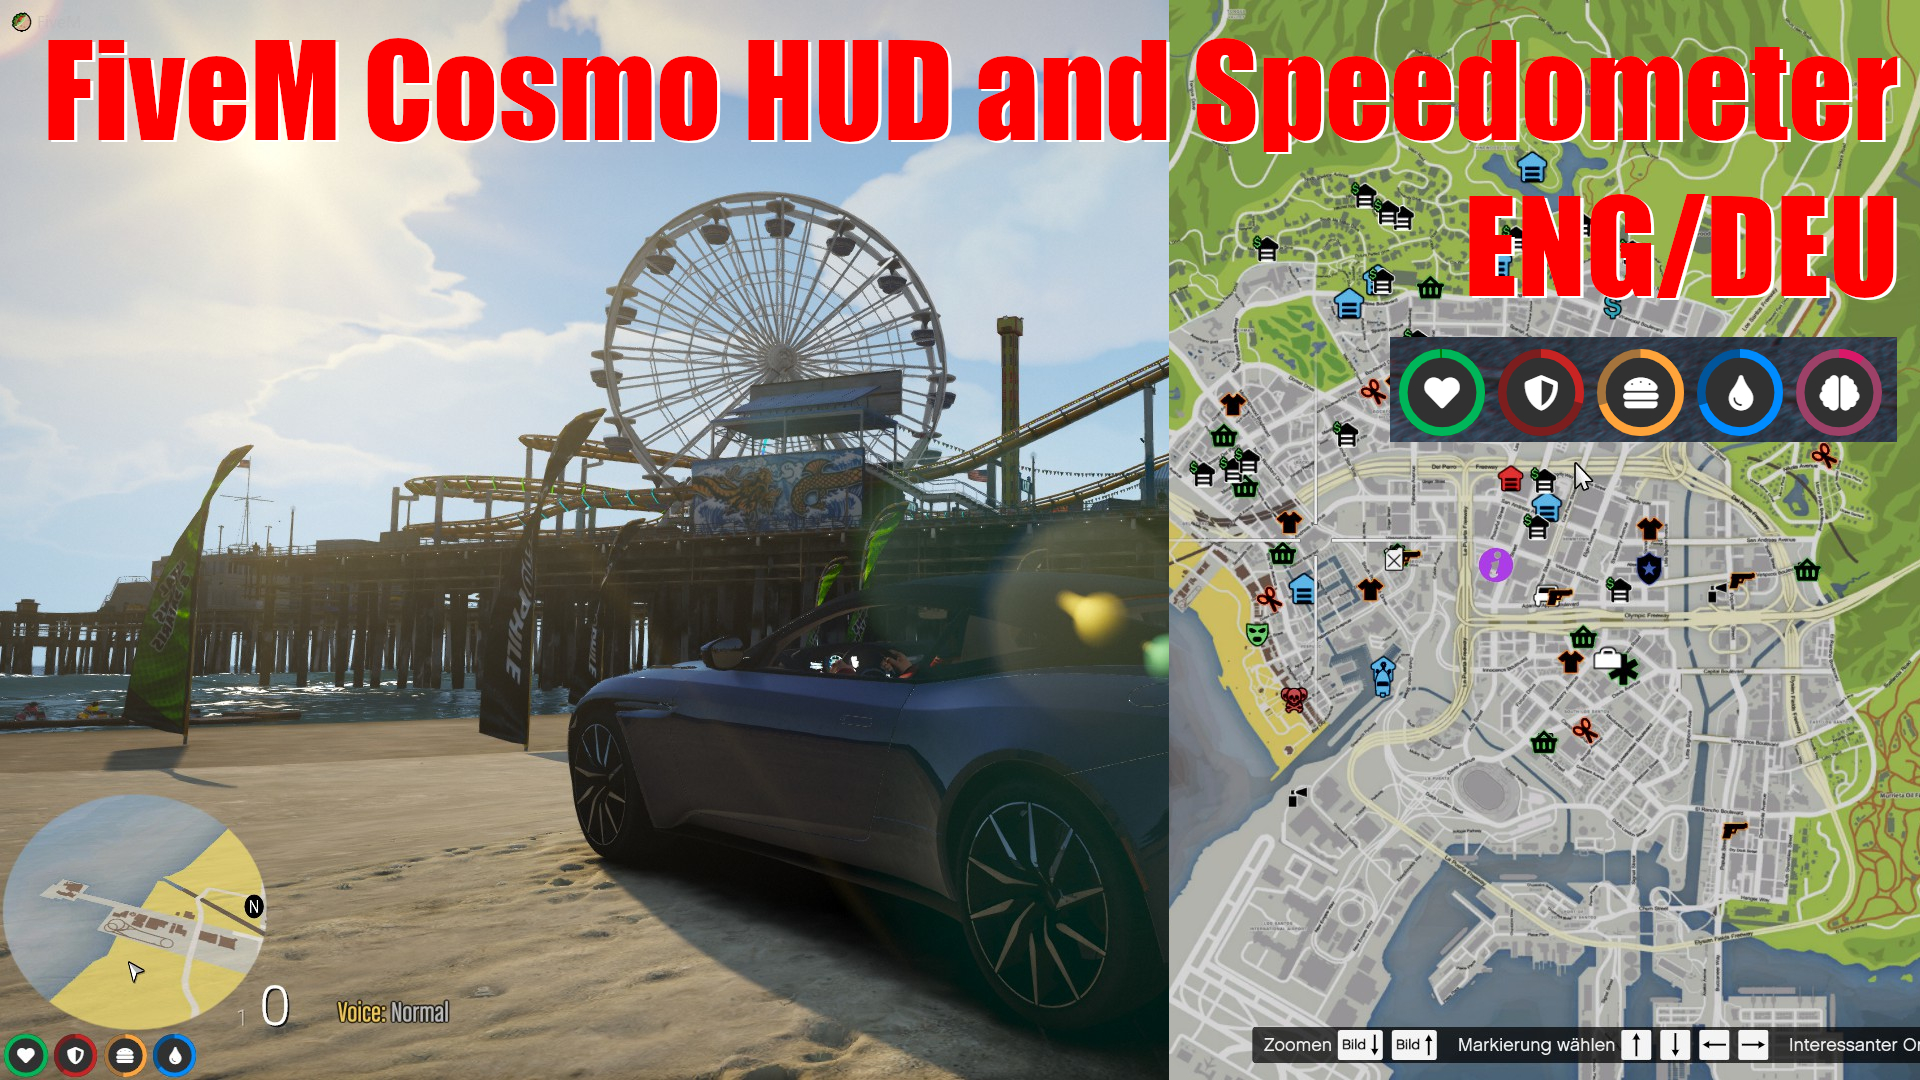 You are currently viewing FiveM Cosmo Hud and Speedometer